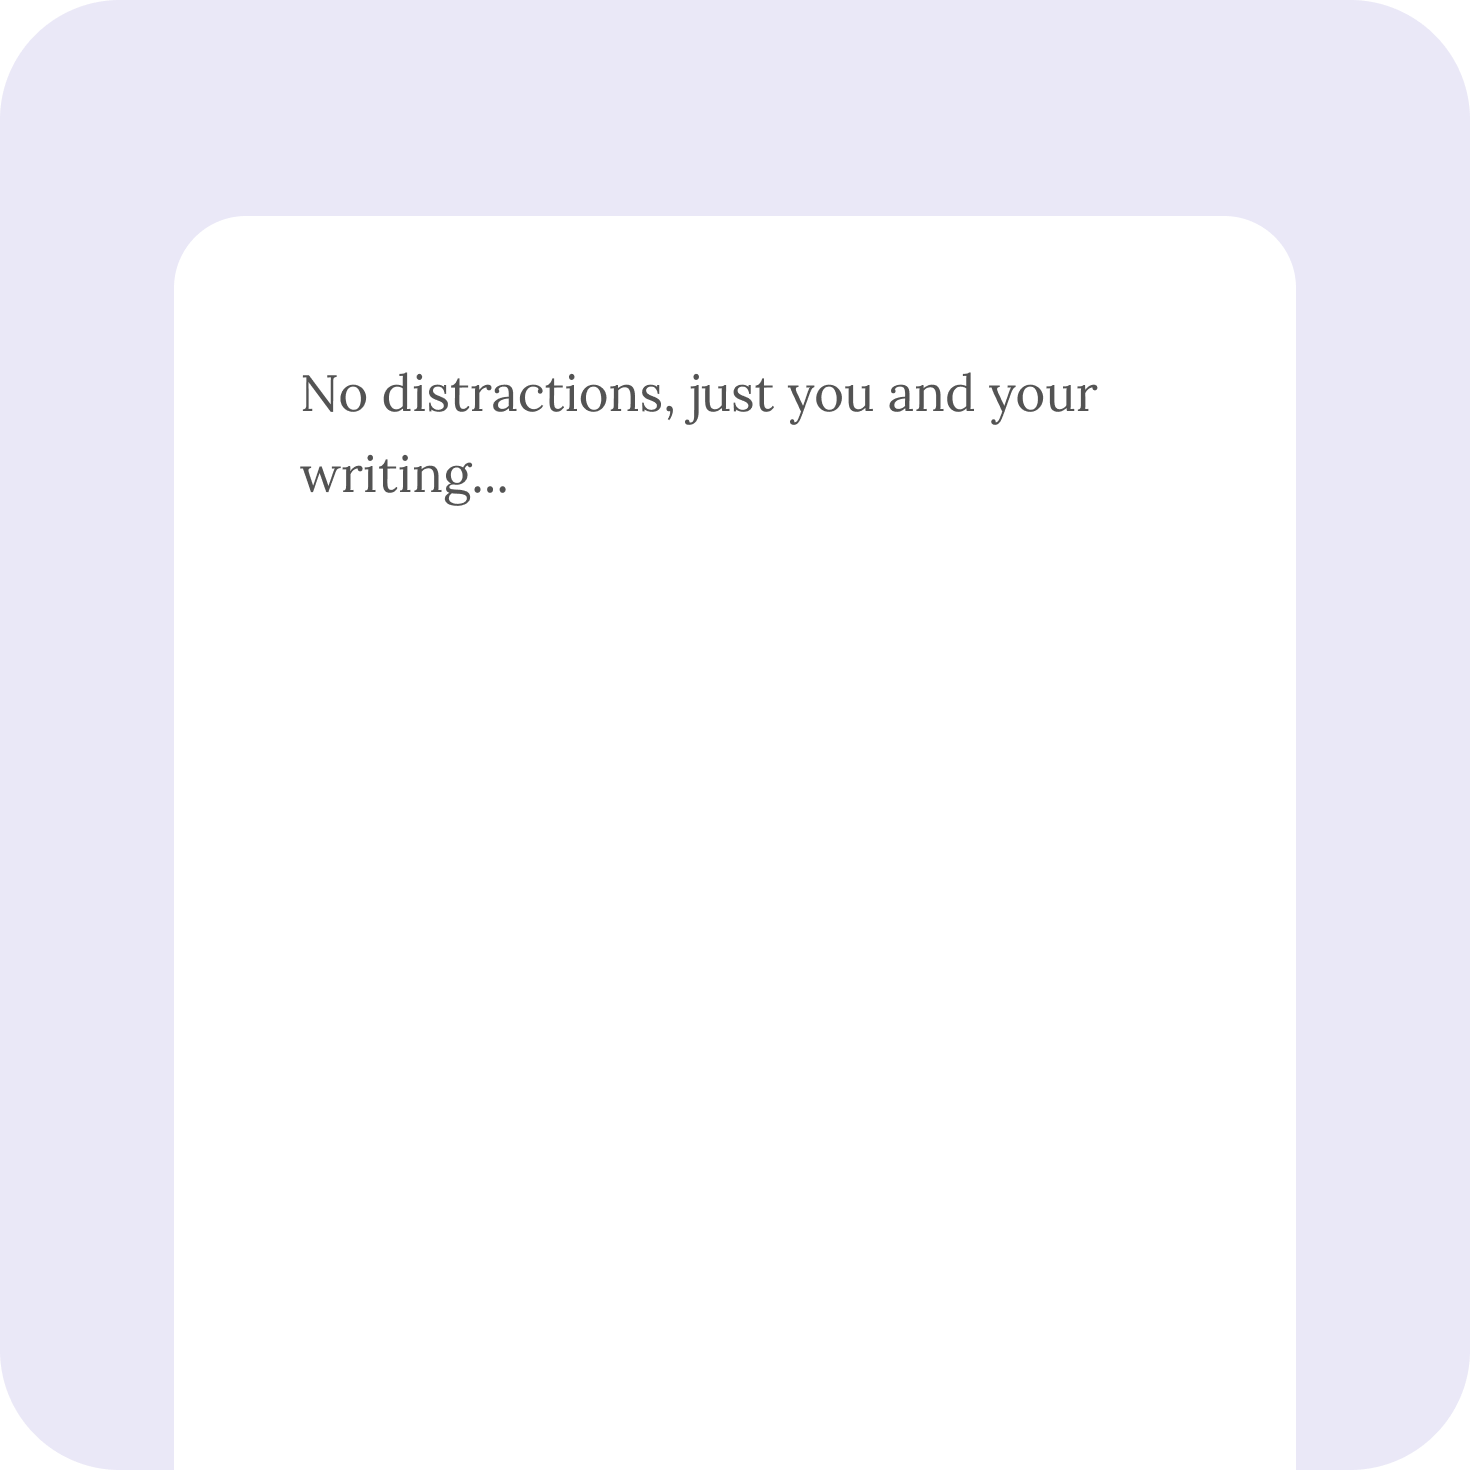 an image of a blank white page with text - no distractions, just you and your writing